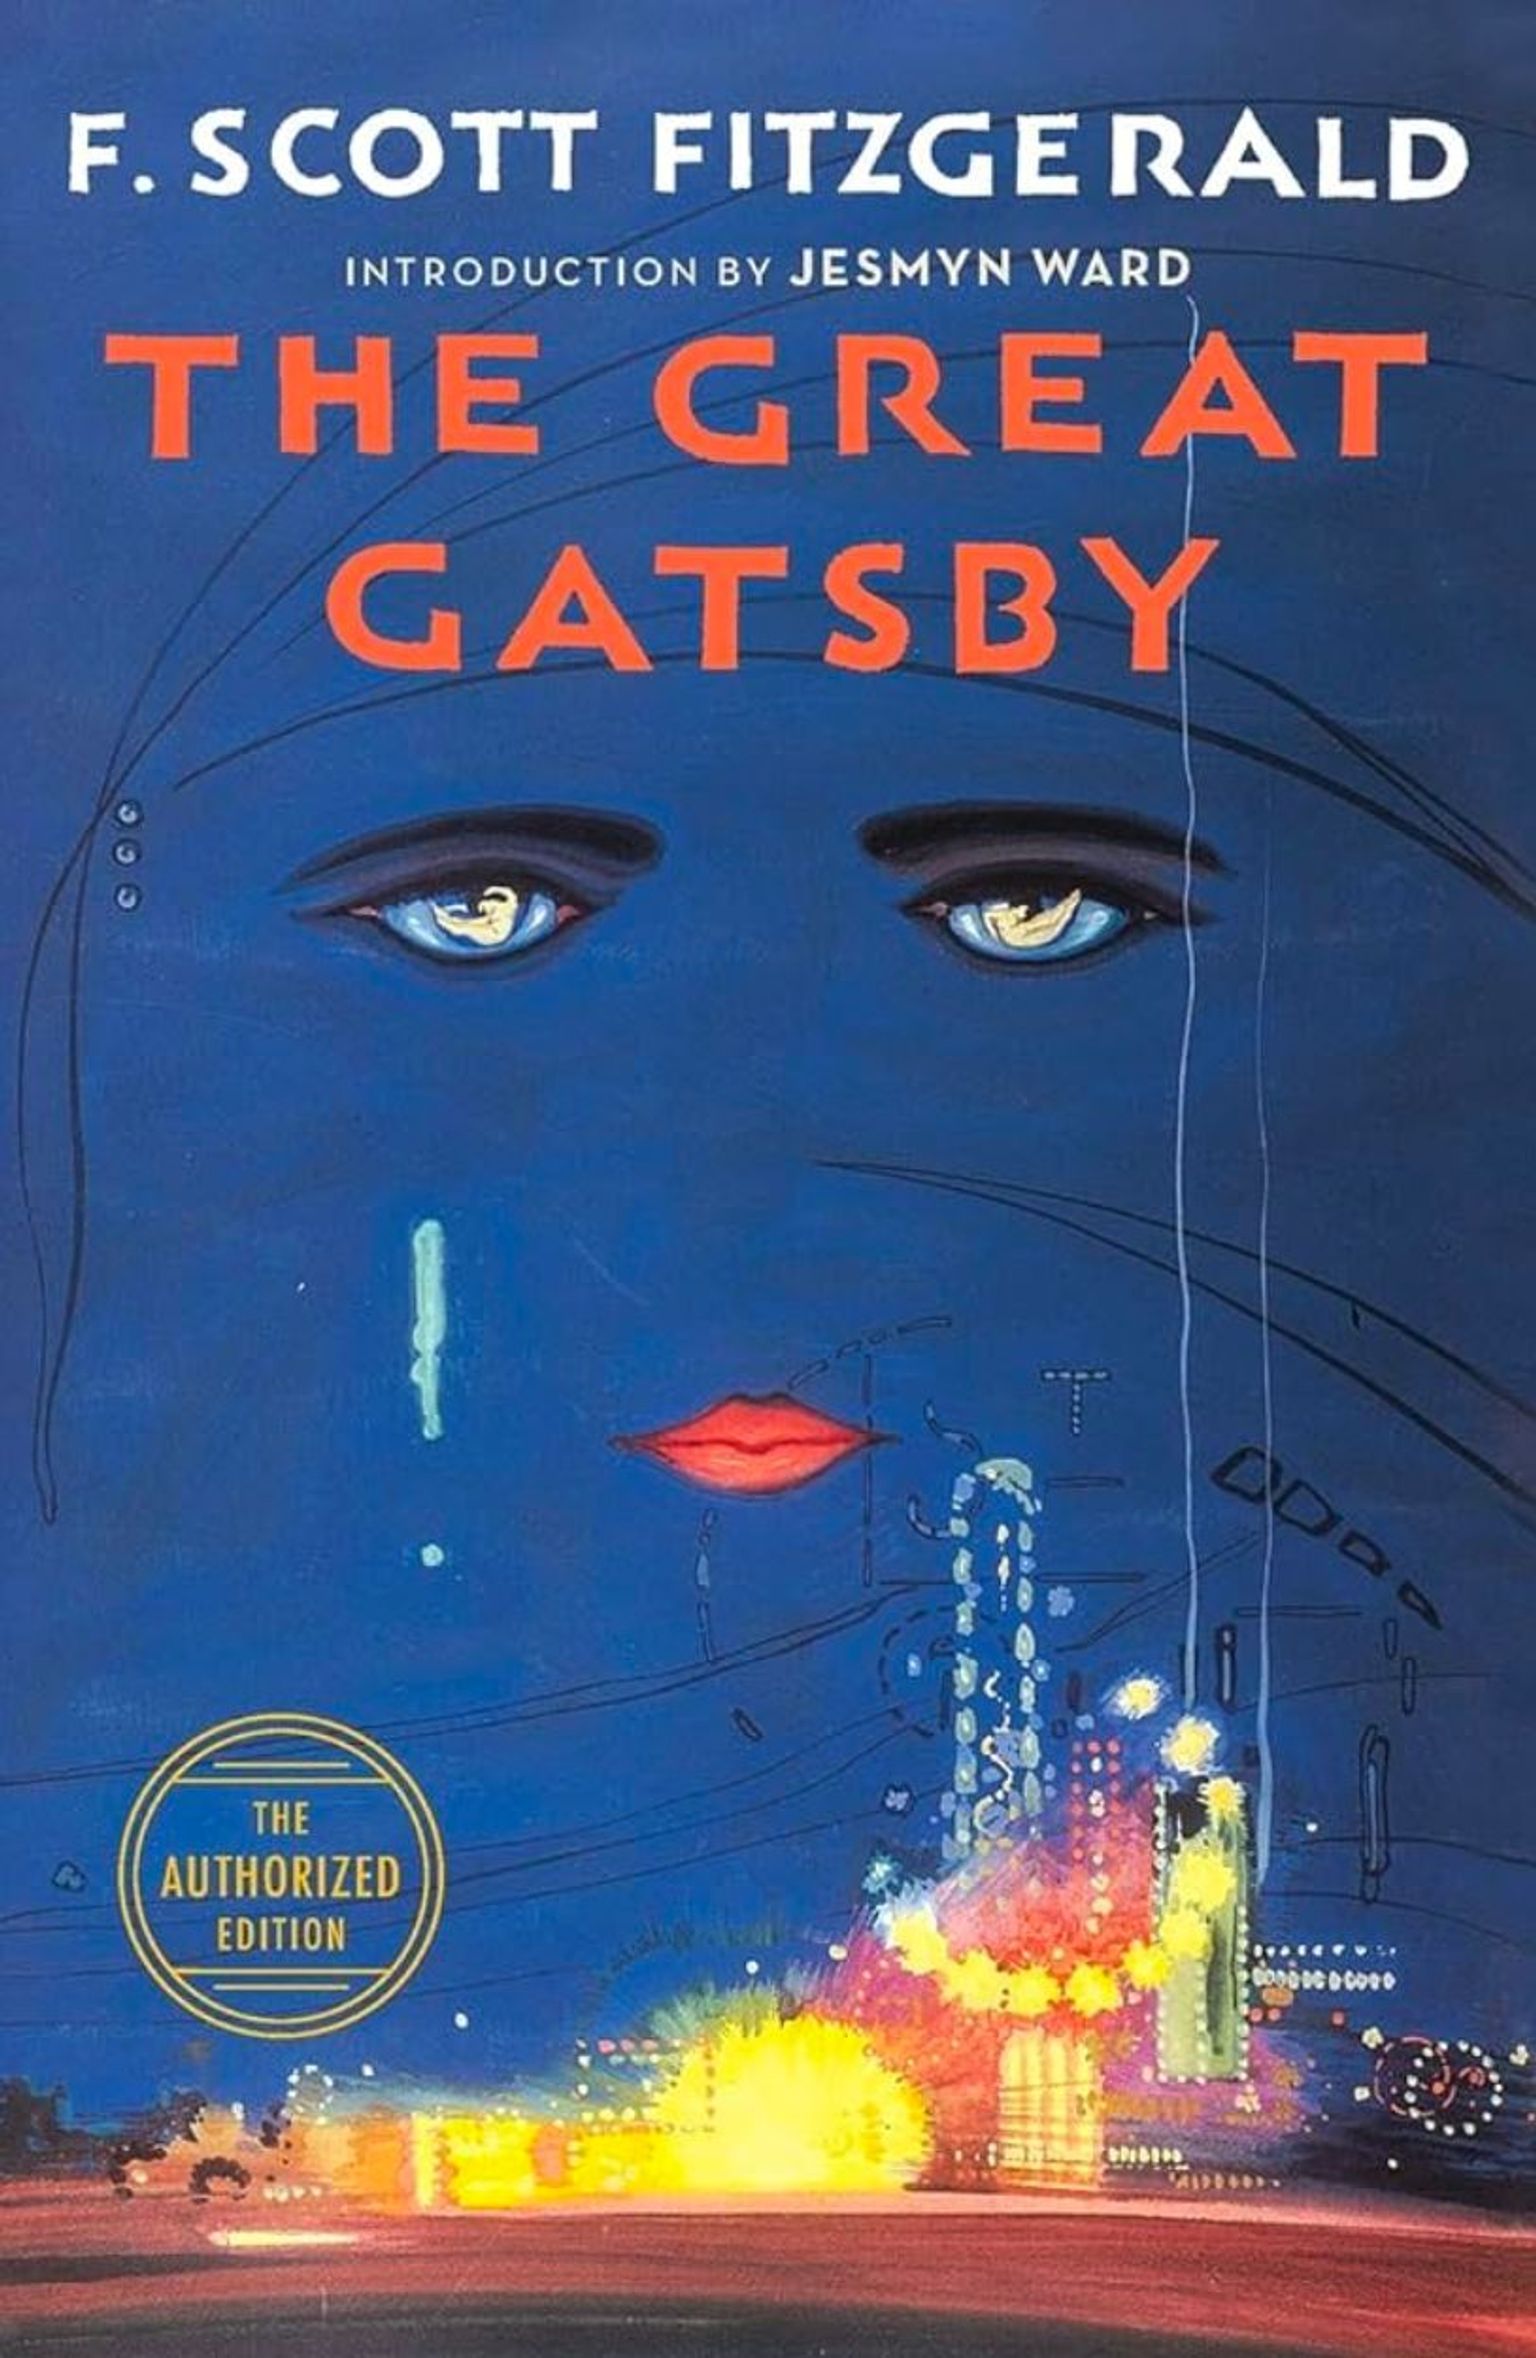 Book Recommendations - The Great Gatsby